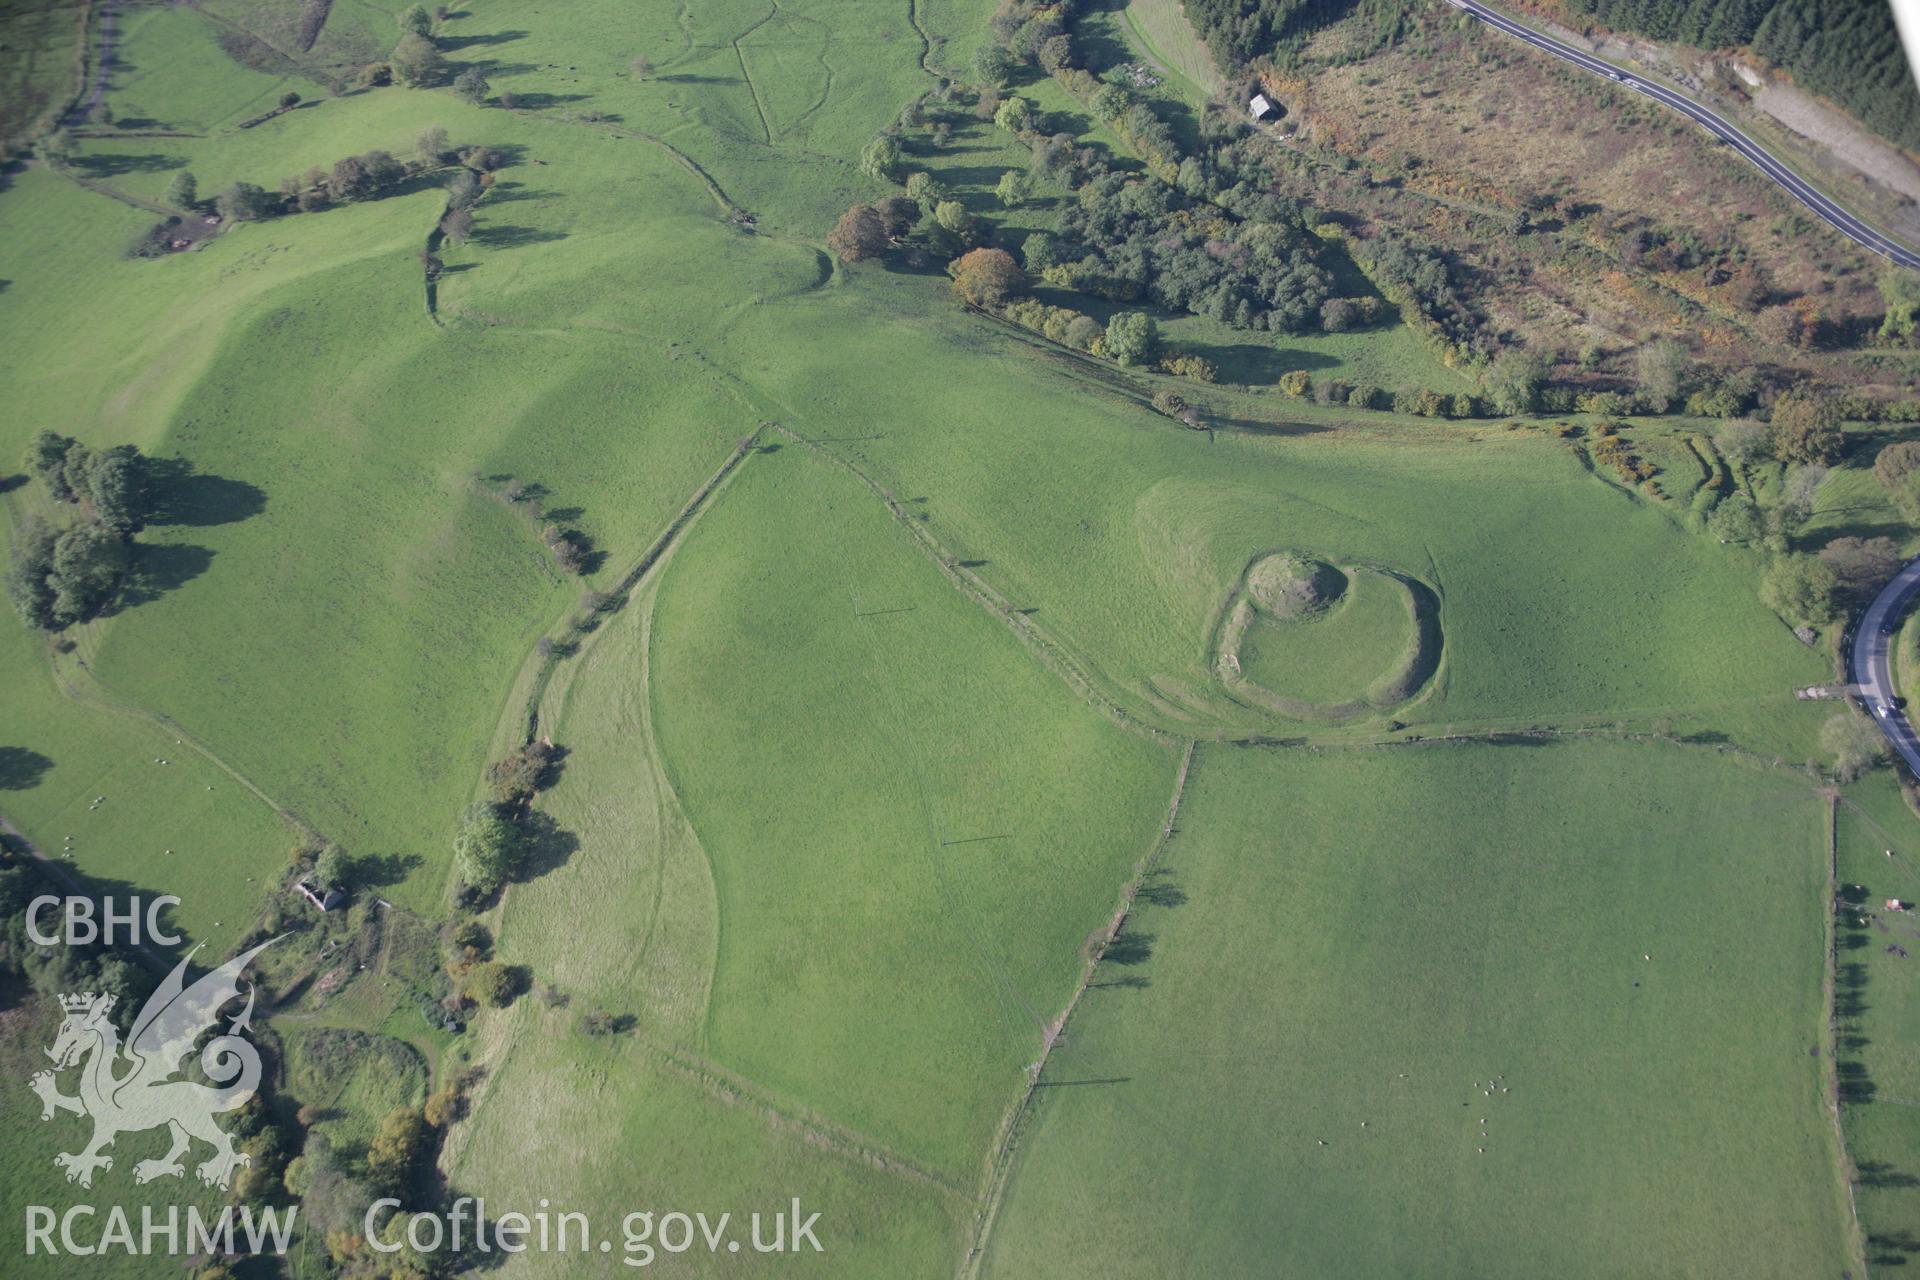 RCAHMW colour oblique aerial photograph of Castell Crugerydd from the south. Taken on 13 October 2005 by Toby Driver